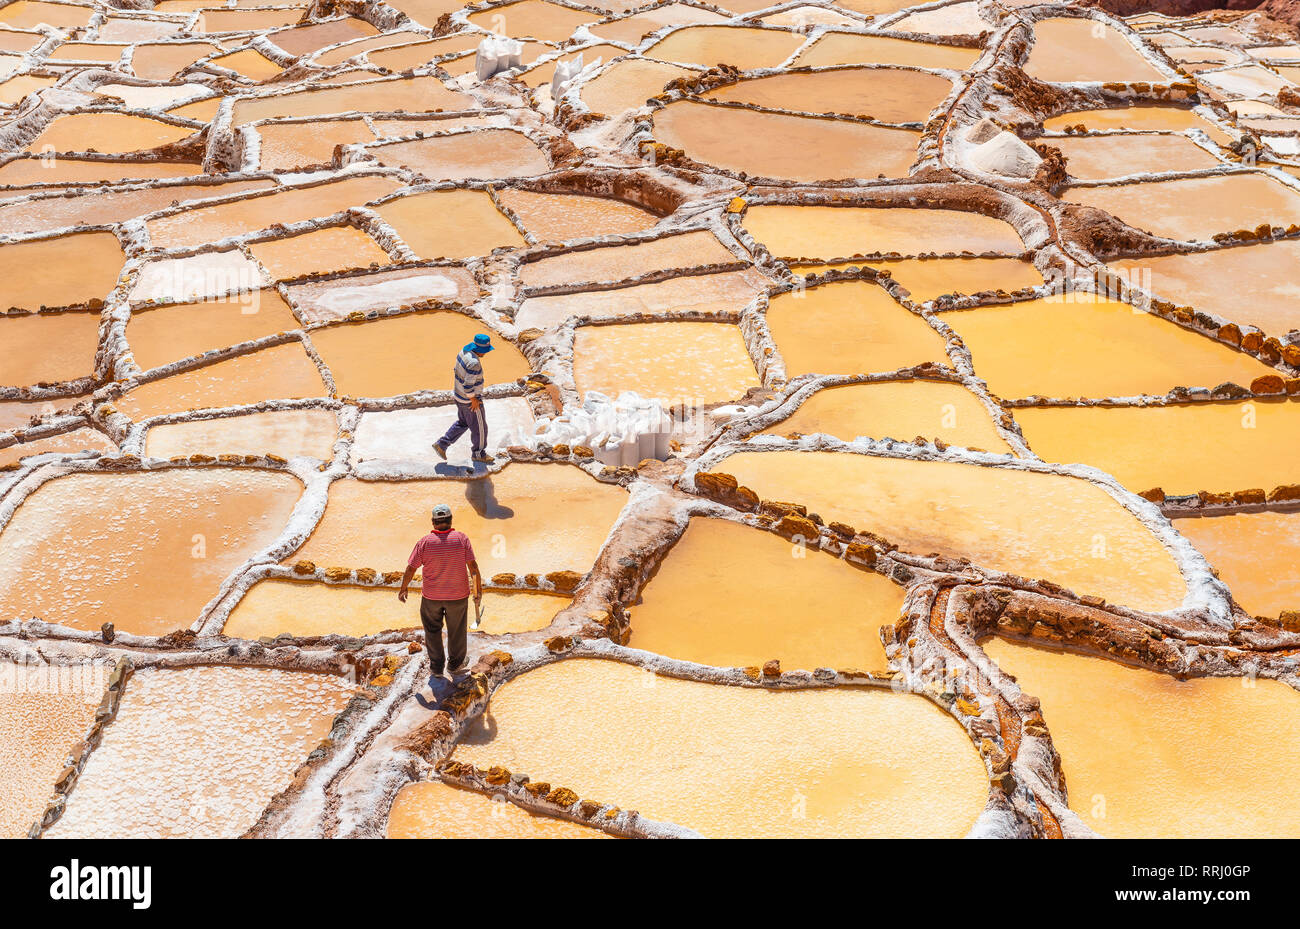 Two men at work collecting salt and salt bags in the famous salt terraces of Maras near the city of Cusco, Peru. Stock Photo